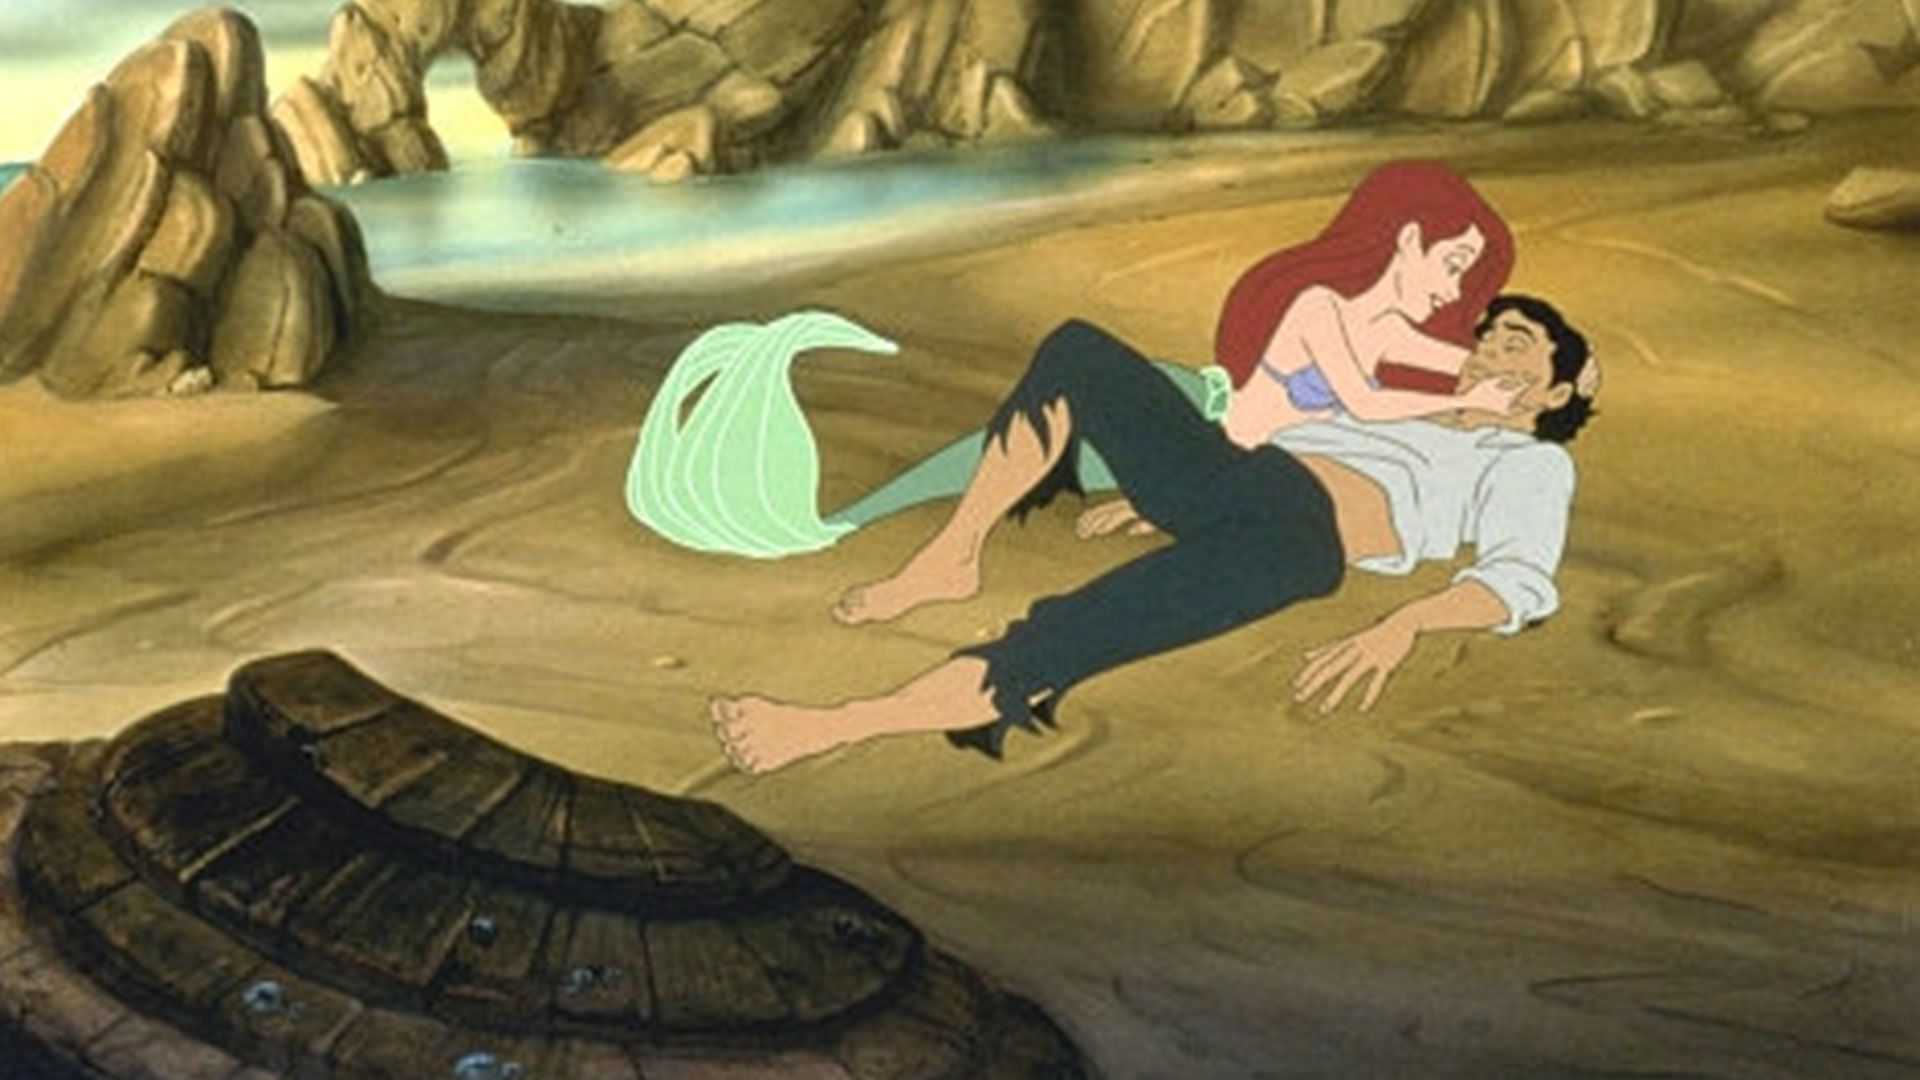 Prince Eric 5 cool facts about Disney's charming prince